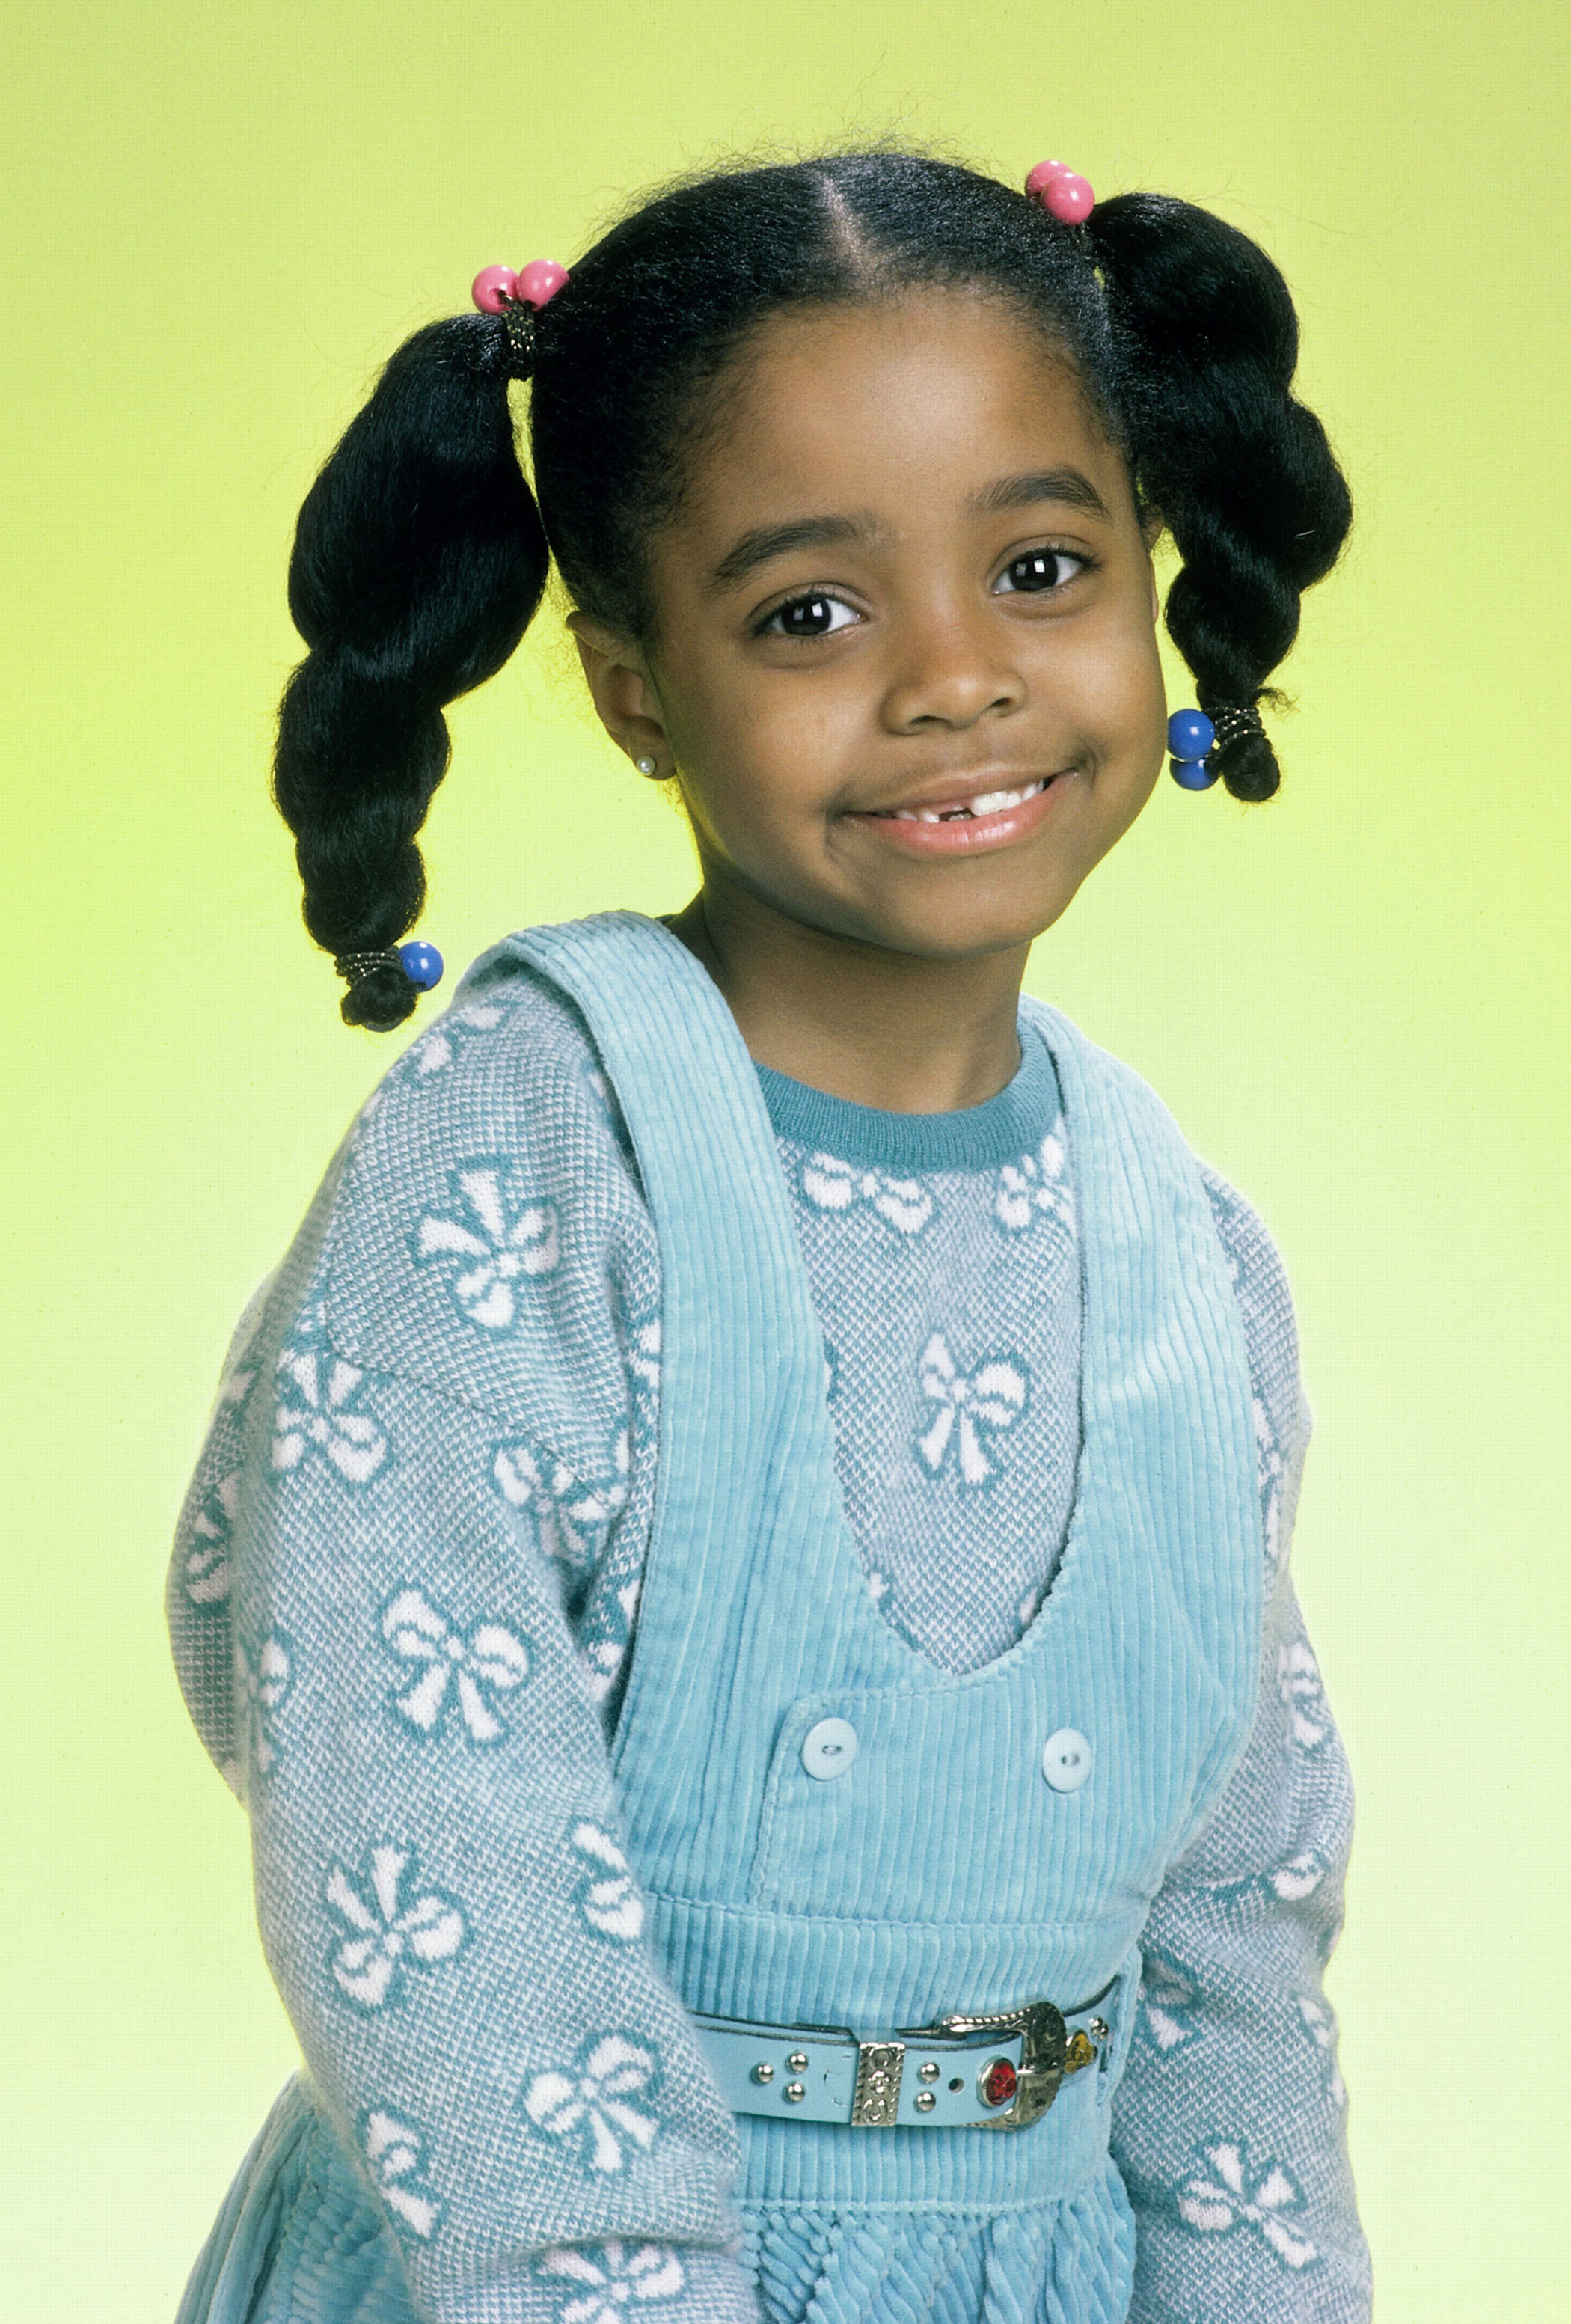 <p>Keshia Knight Pulliam started acting professionally at 3 on "Sesame Street." By 4, she was starring alongside Bill Cosby as Rudy, the youngest Huxtable, on "The Cosby Show." At 6, she became the youngest actress to earn an Emmy nomination for best supporting actress.</p>